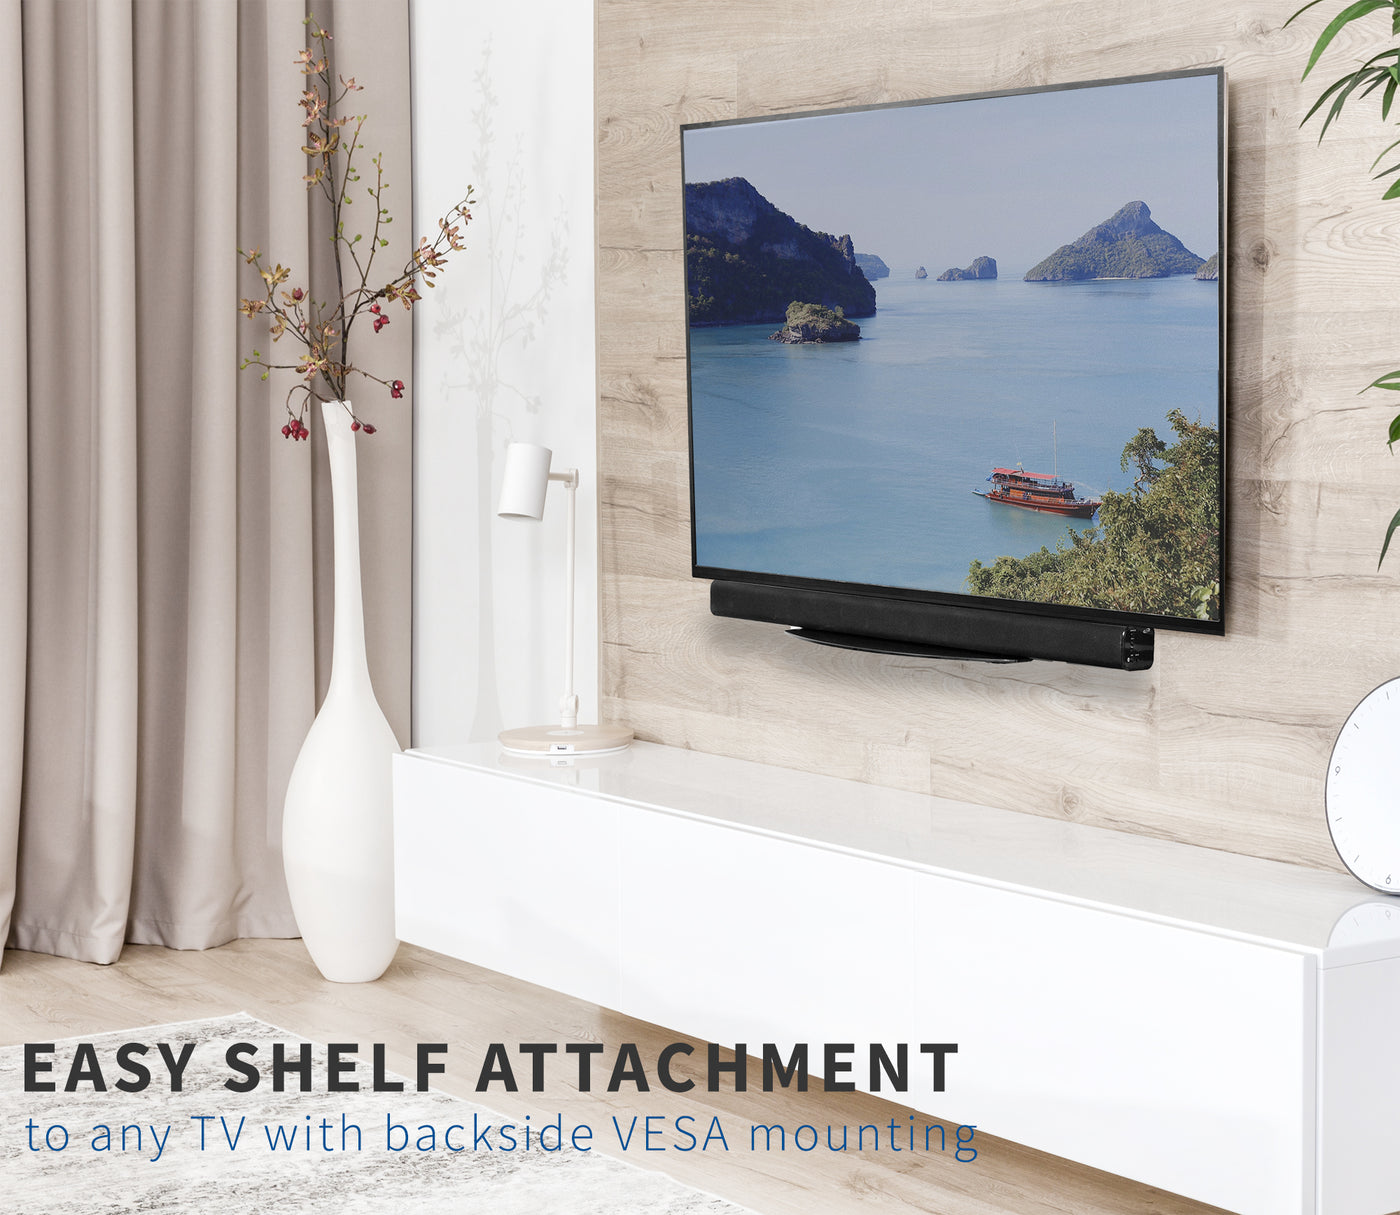 Sturdy over/under-glass shelf with support holding a large soundbar below the TV screen.